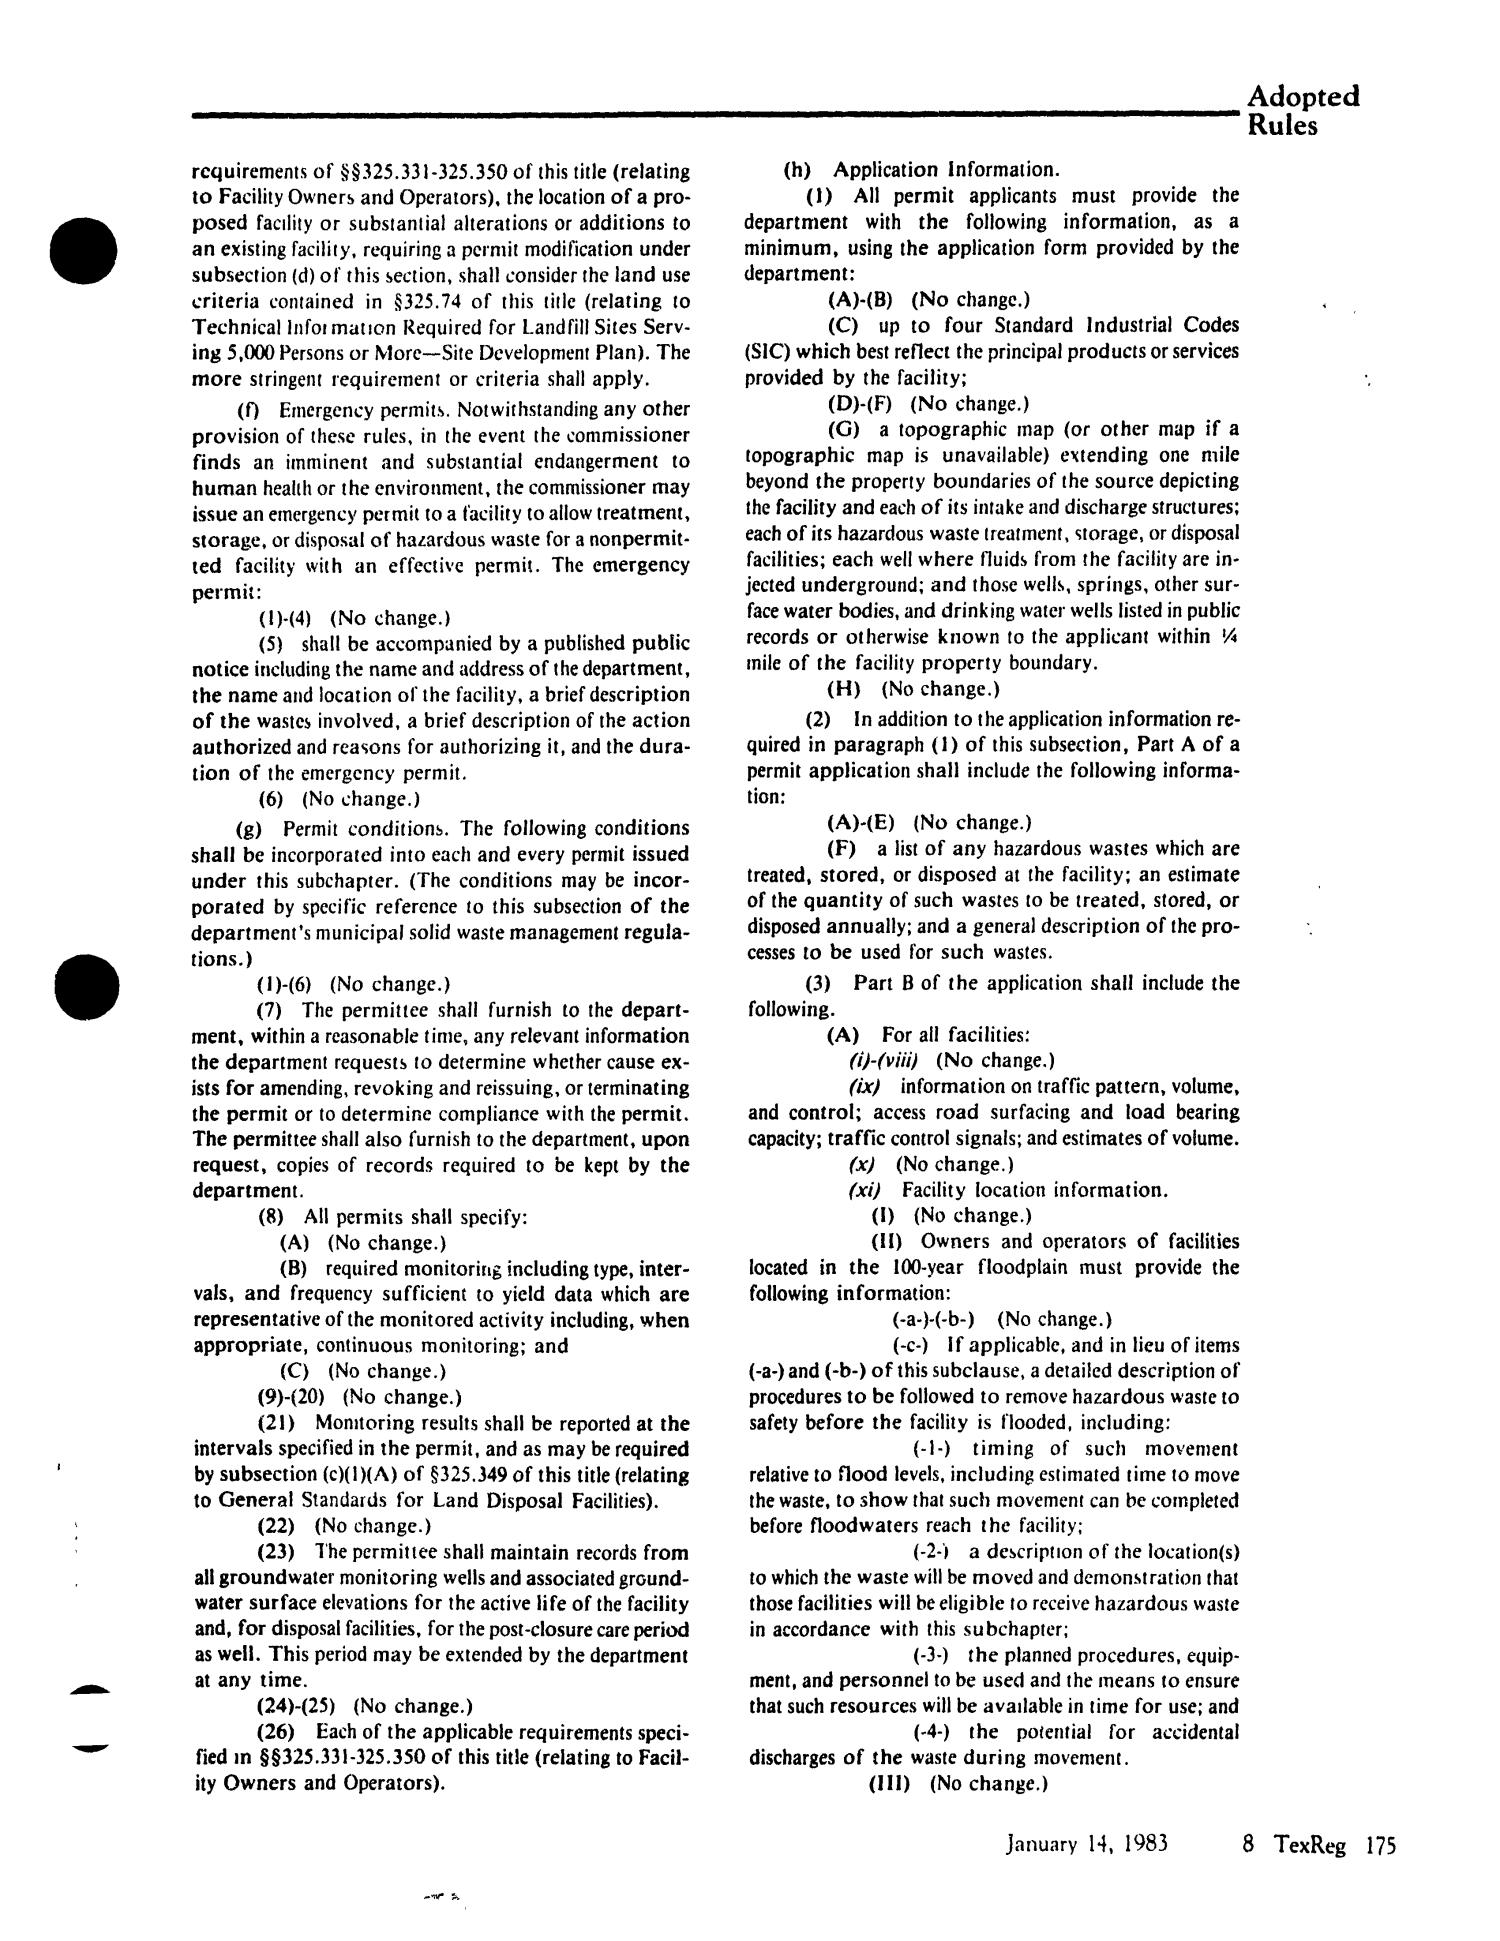 Texas Register, Volume 8, Number 4, Pages 131-202, January 14, 1983
                                                
                                                    175
                                                